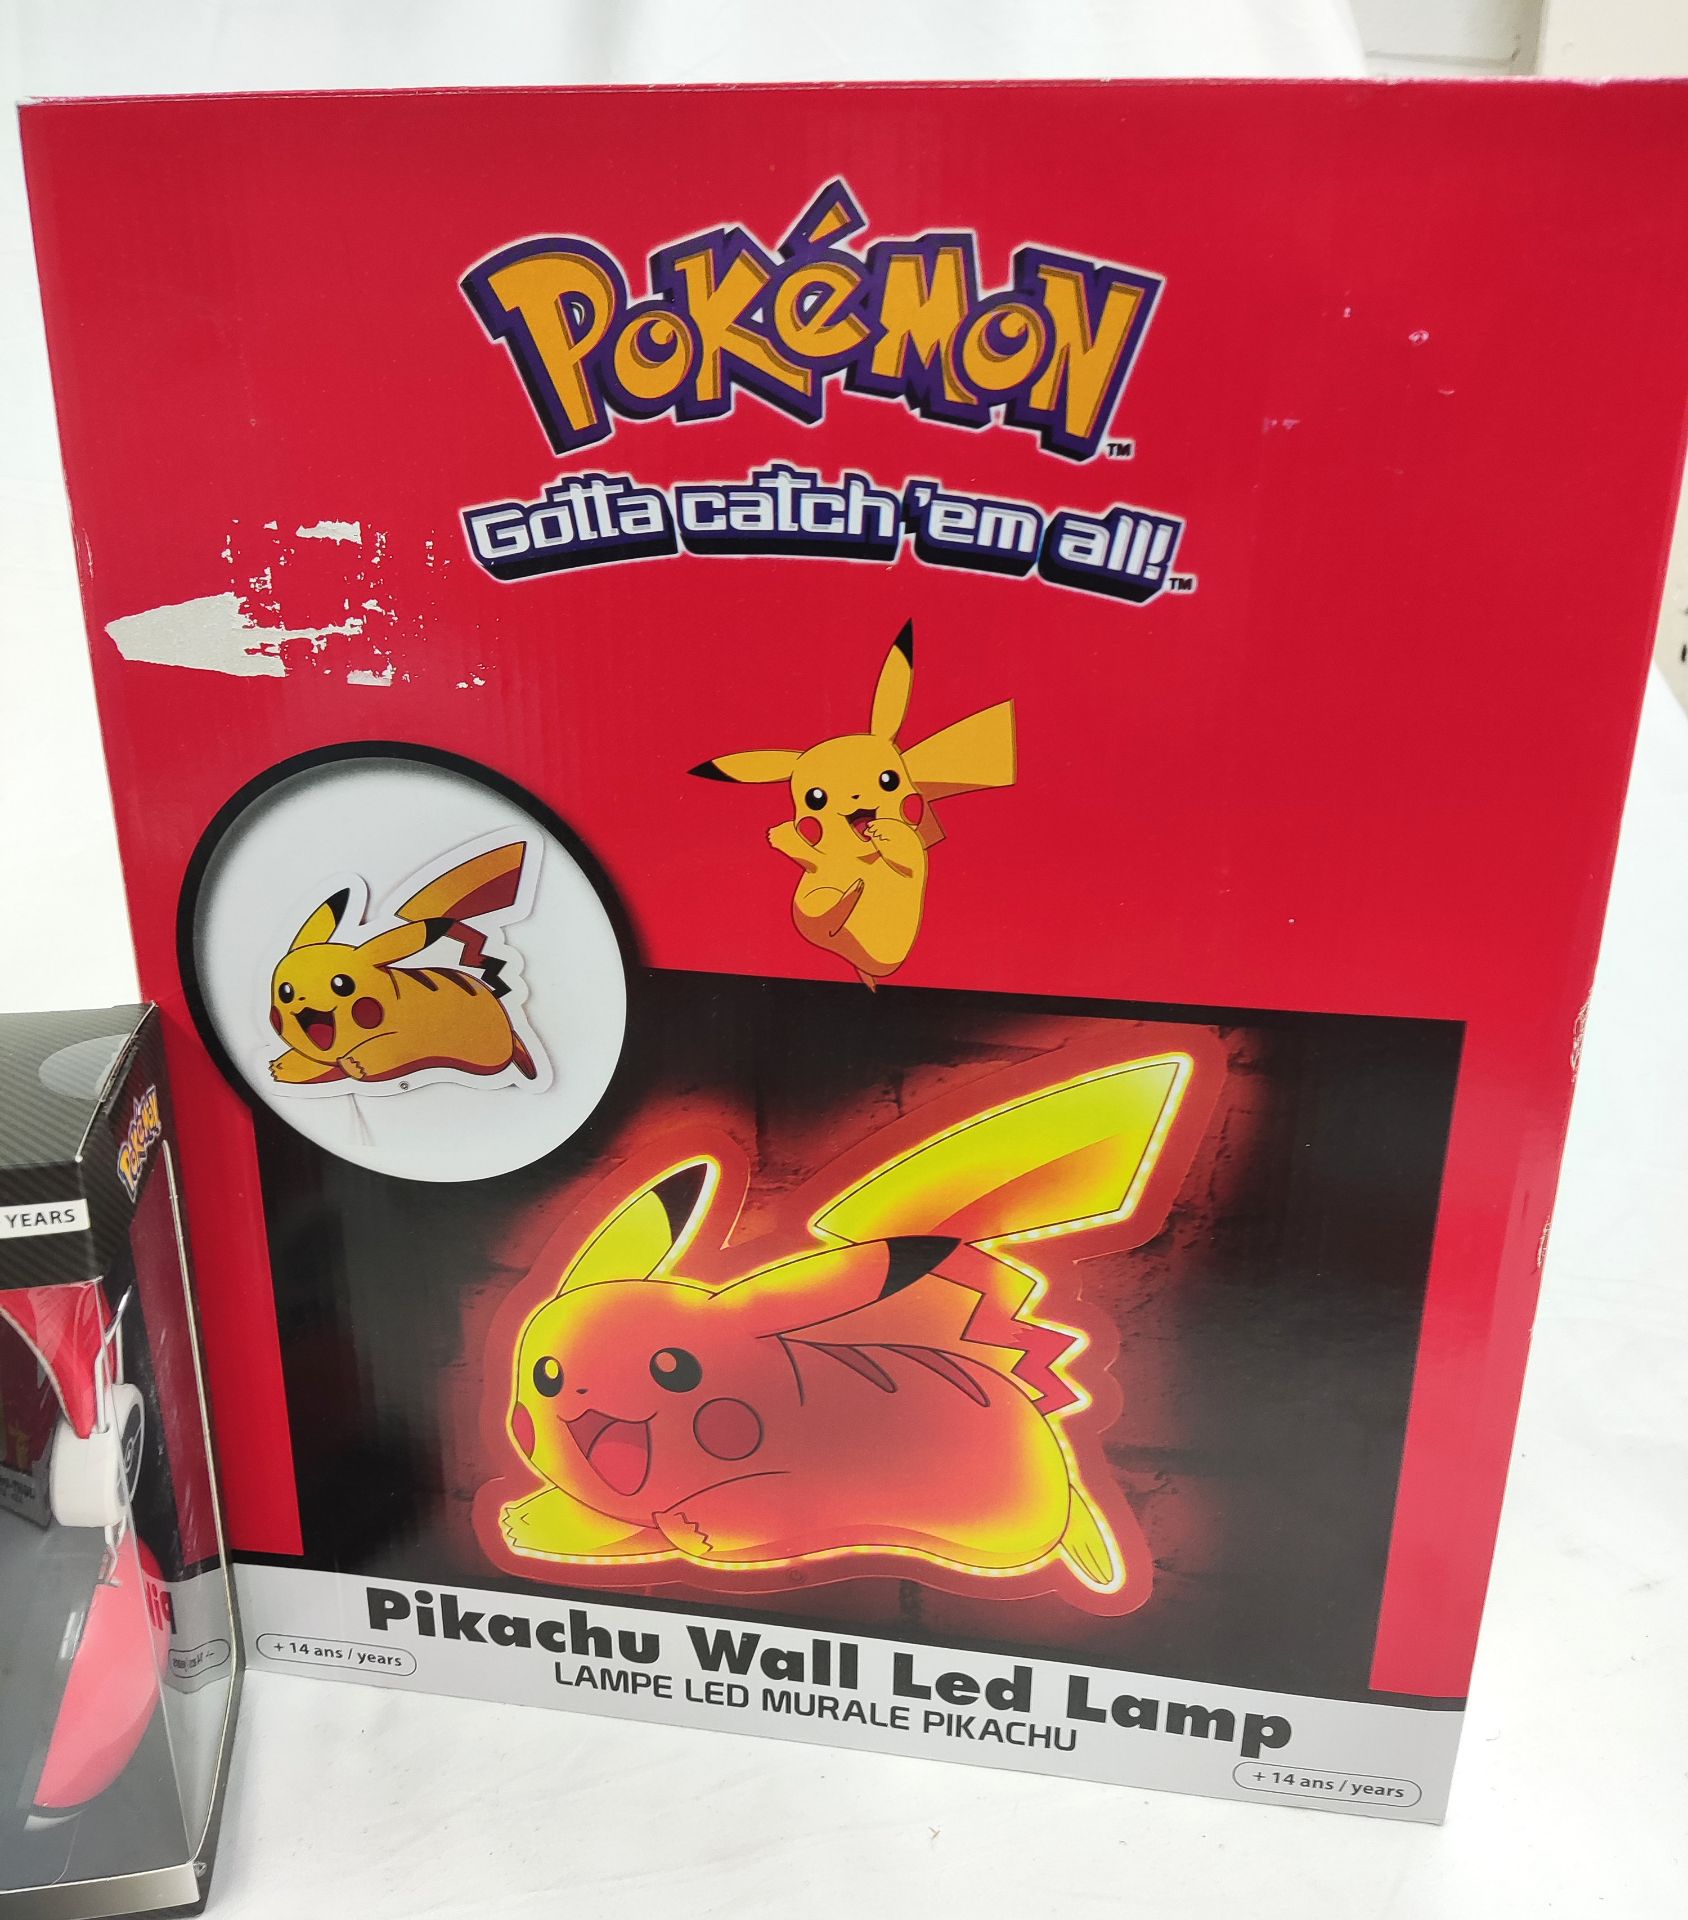 1 x POKEMON Assortment of Toys and Collectibles - Plush Squirtle, Pikachu Radio Alarm Clock and More - Image 7 of 17